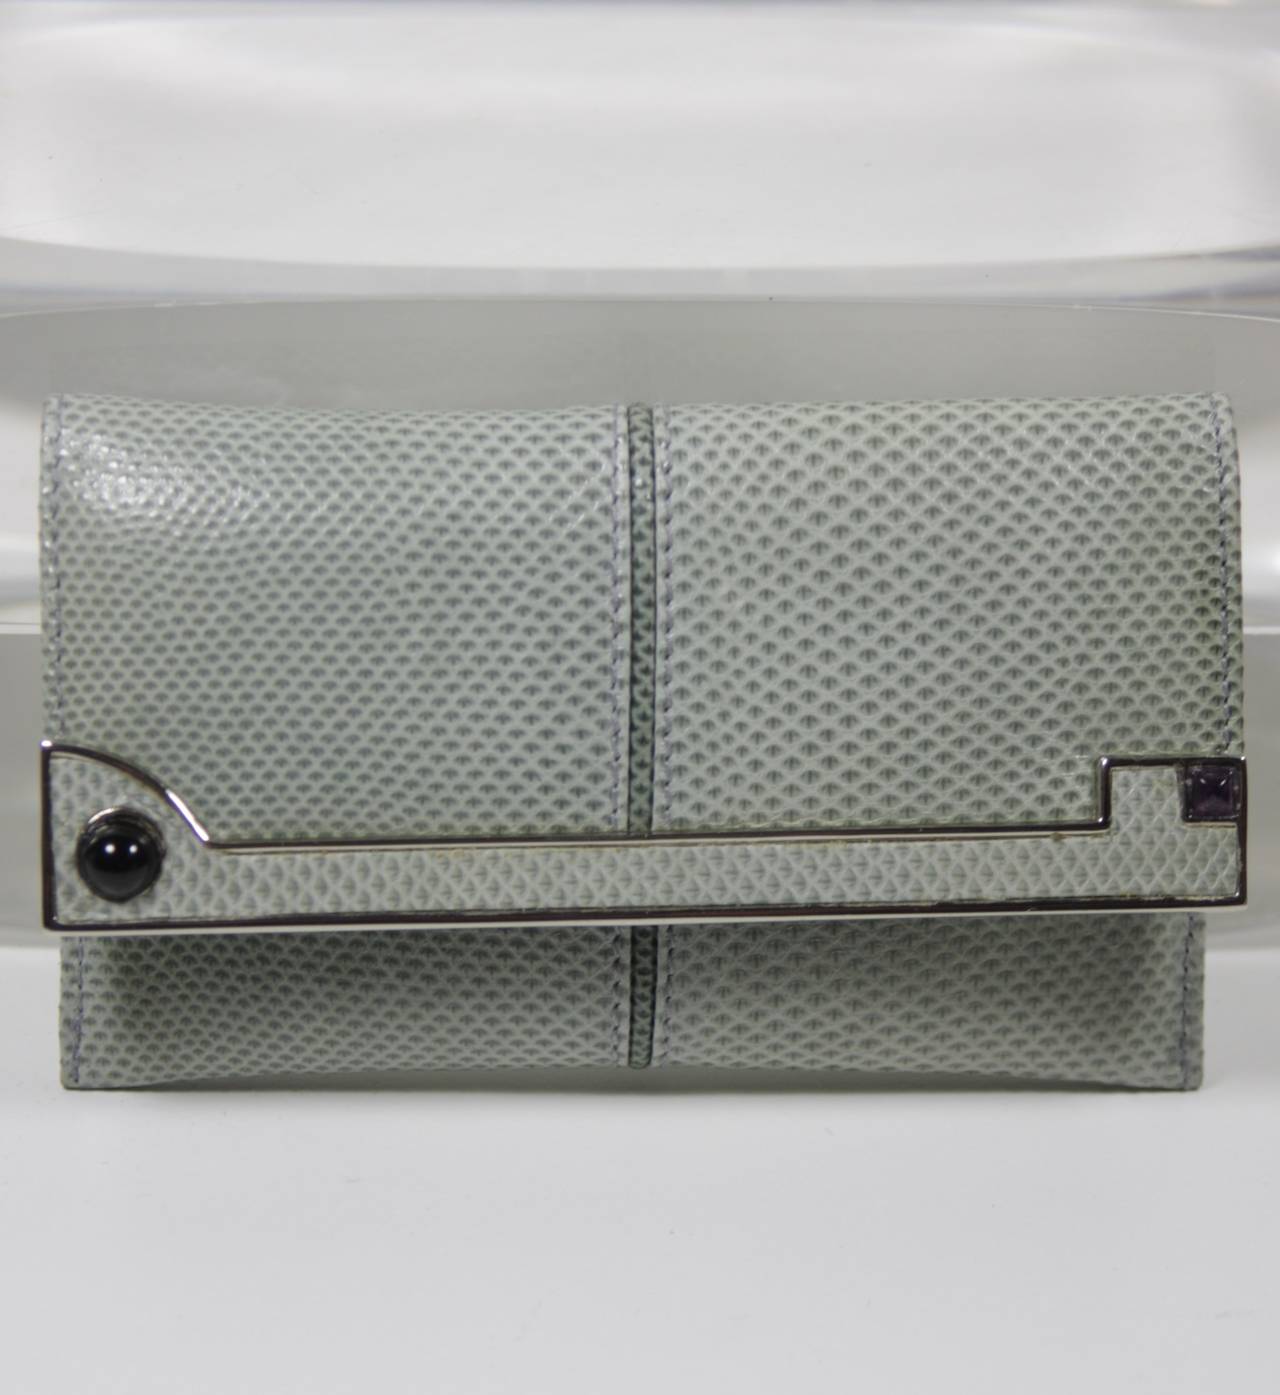 This vintage Judith Leiber is available for viewing at our Beverly Hills Boutique. We offer a large selection of evening gowns and luxury garments.

This wallet is composed of a bluish grey lizard skin and features silver hued details. There is an